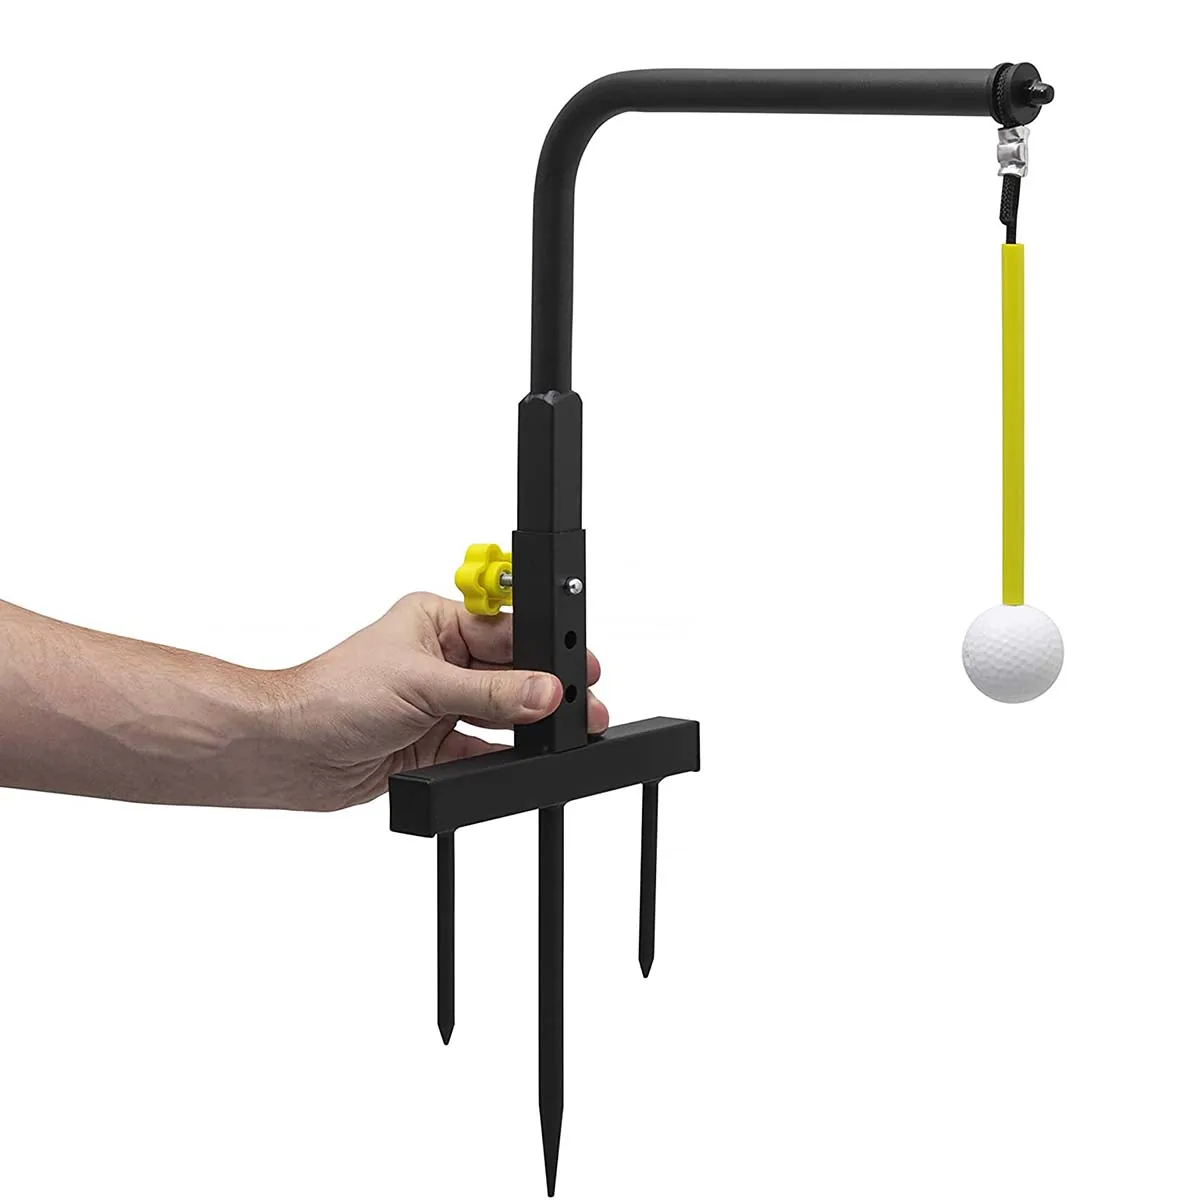 Golf Swing Groover Training Aid Indoor/Outdoor Swing Groover,Golf Training Aids Golf Club Equipment,Golf Accessories Swing Tempo